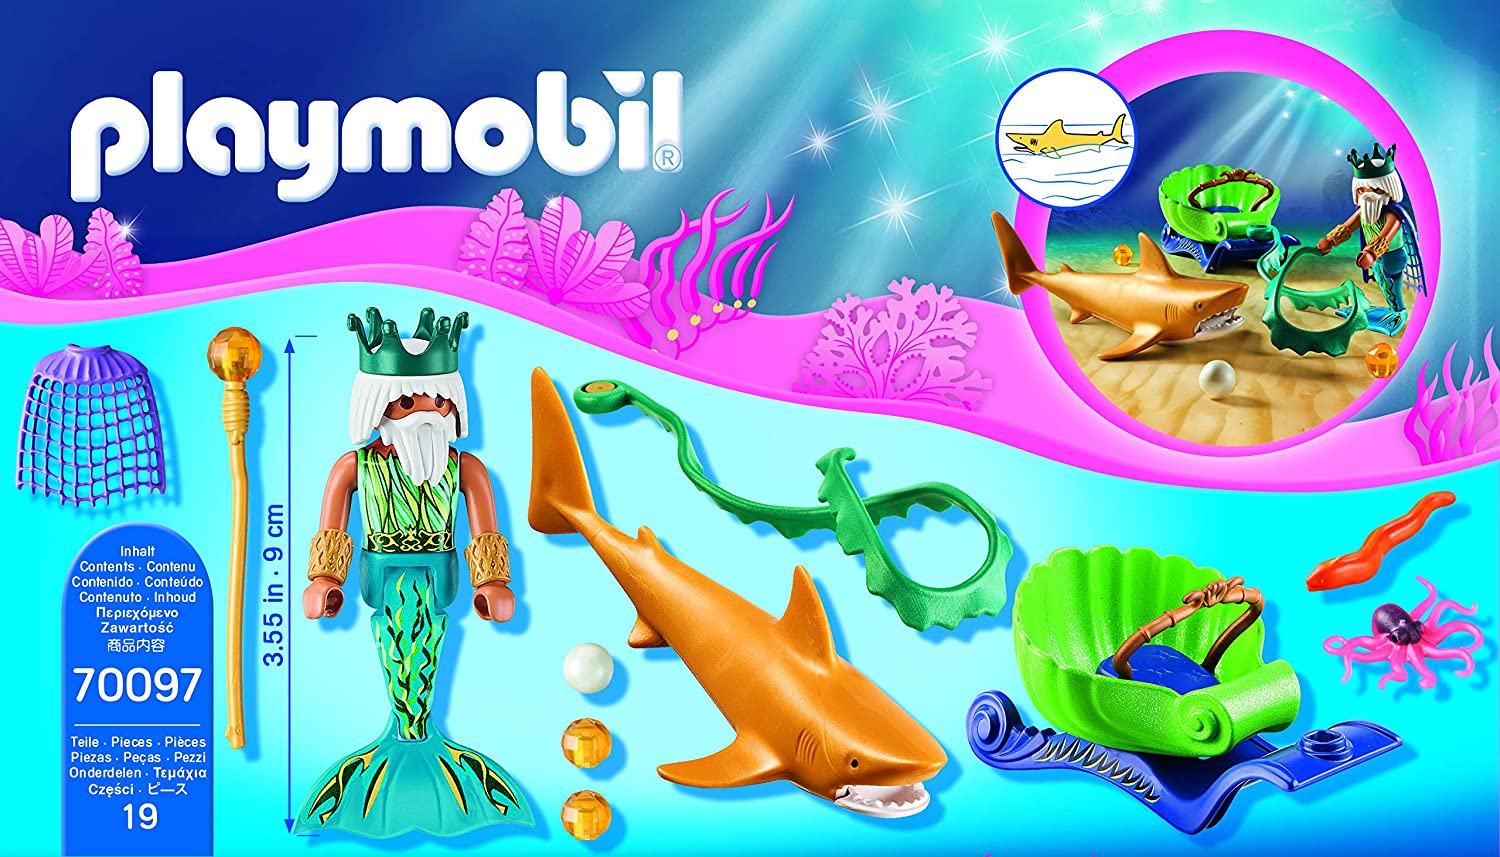 PLAYMOBIL Magical Mermaids King of the Sea with Shark Carriage (70097)